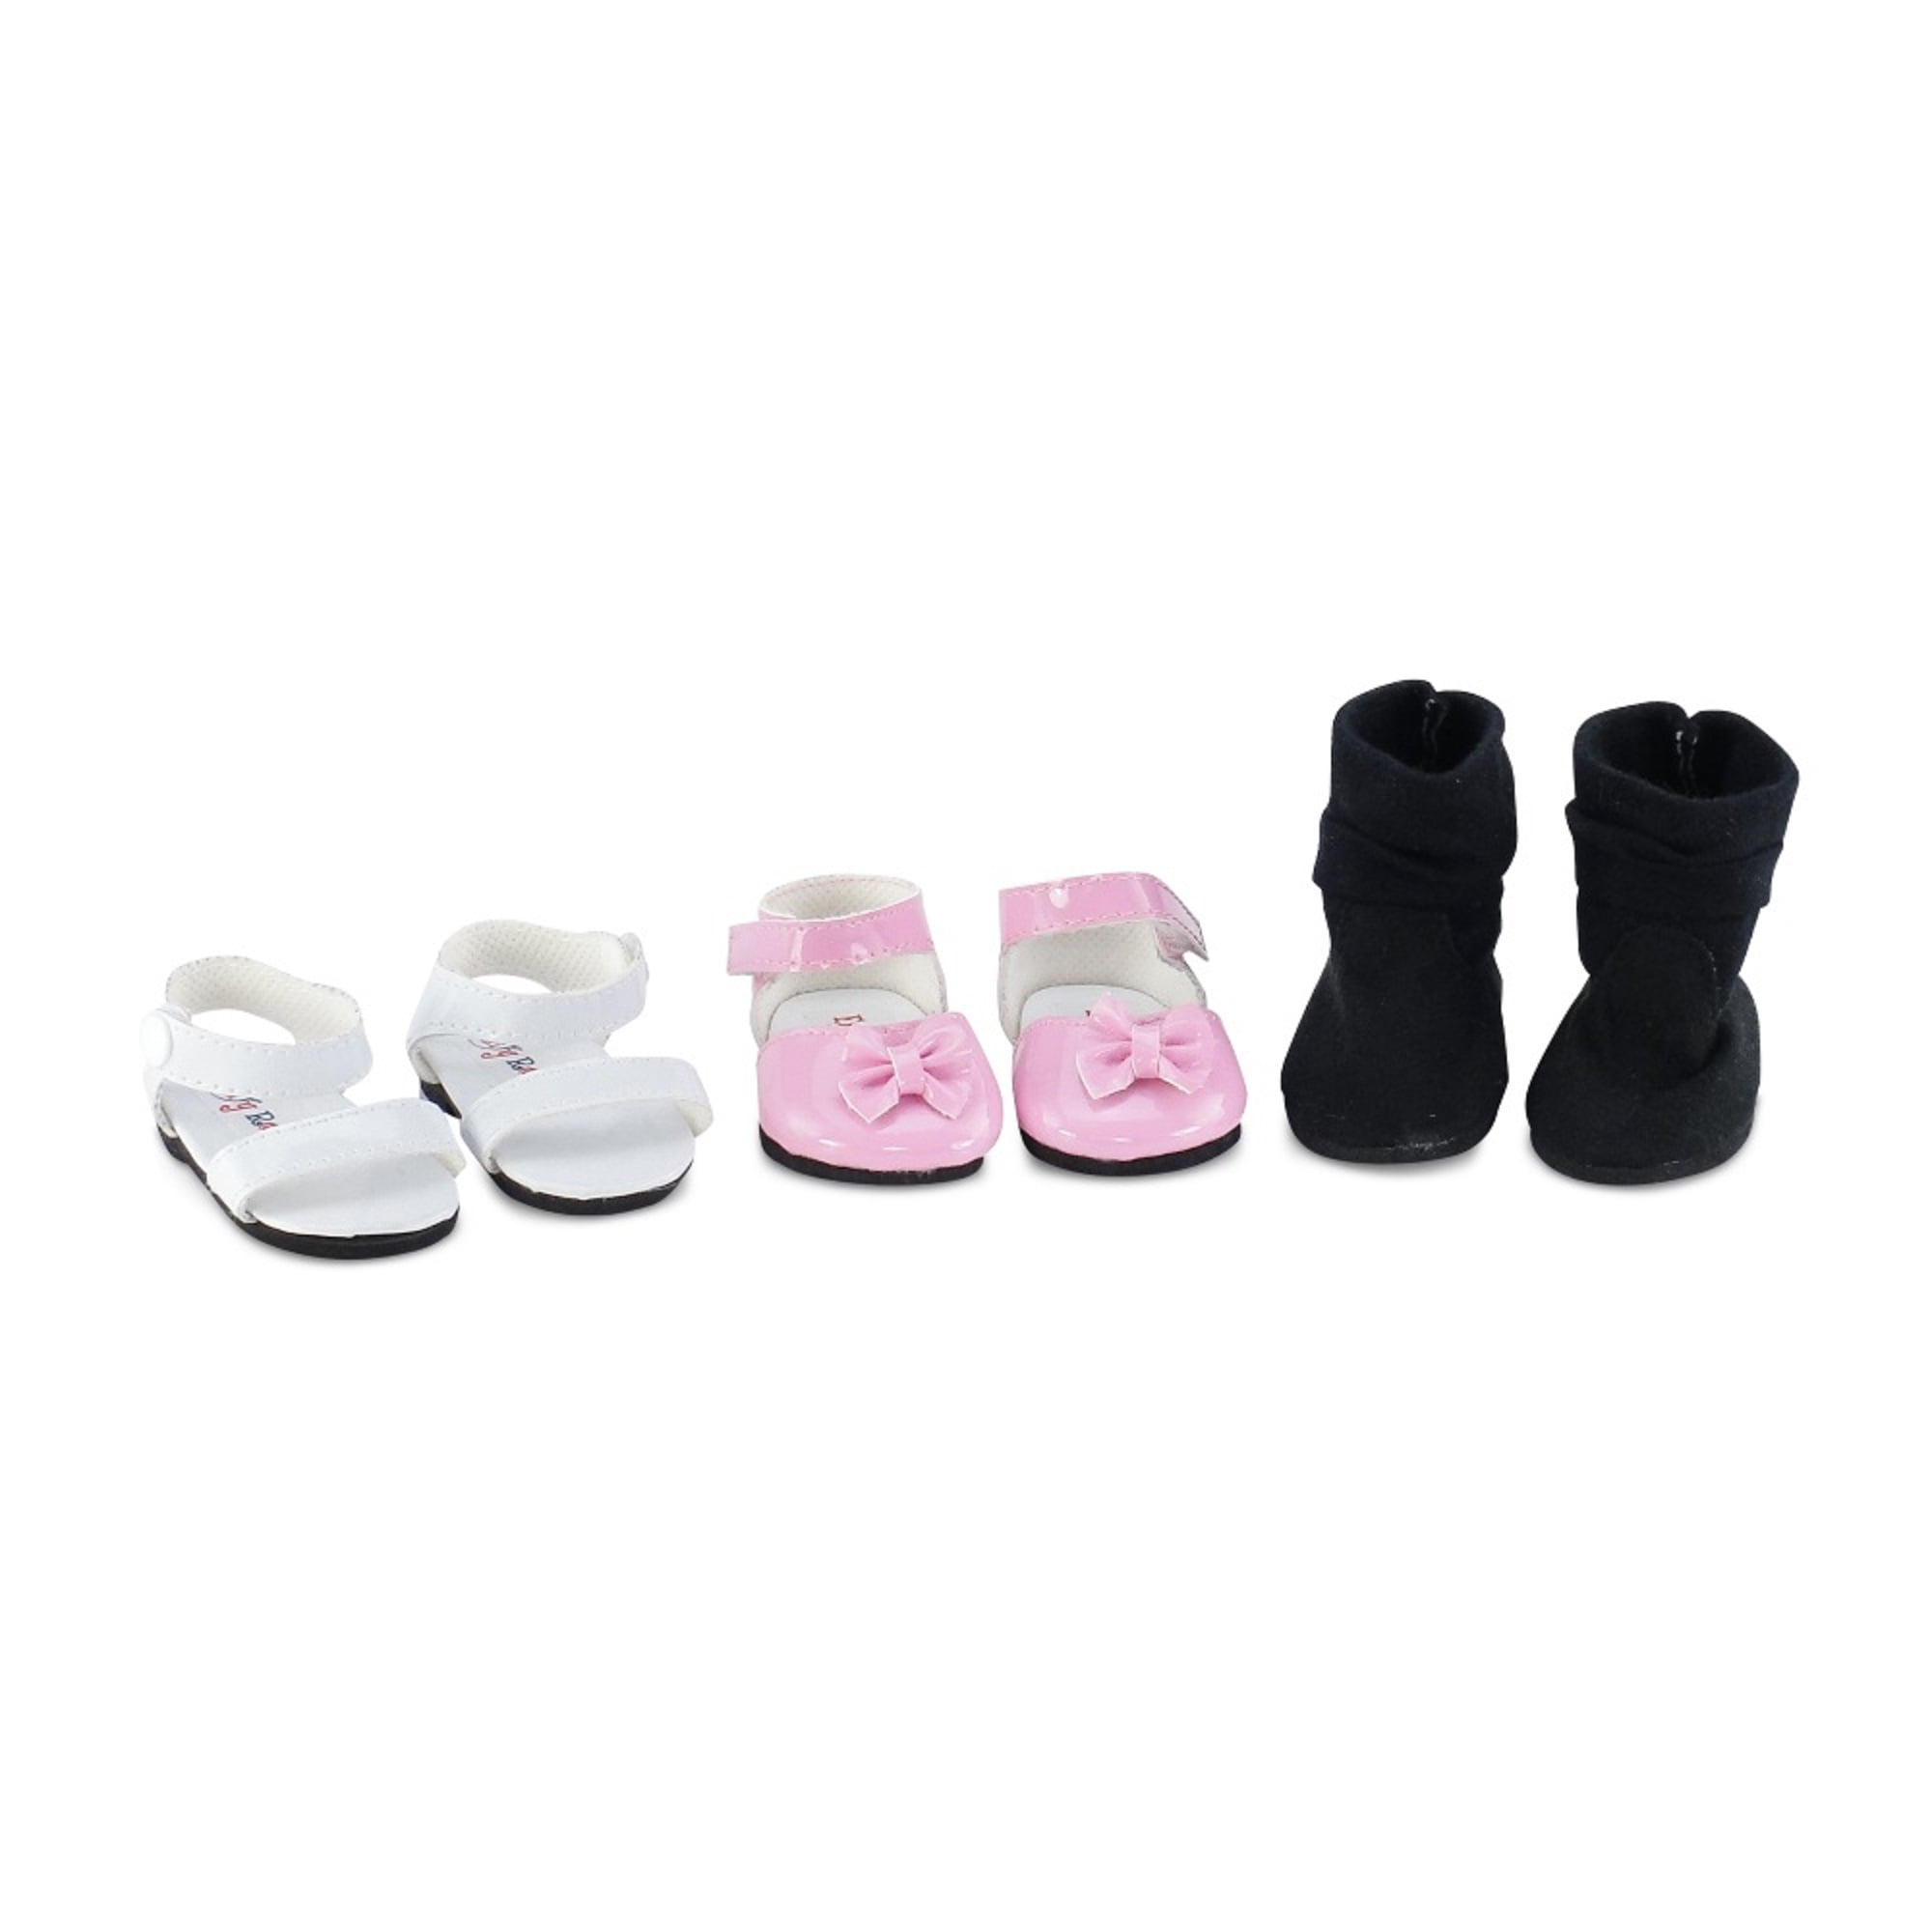 Mini PU Leather Doll Shoes for 18inch Baby Girl Dolls Toy Accessories Cute 